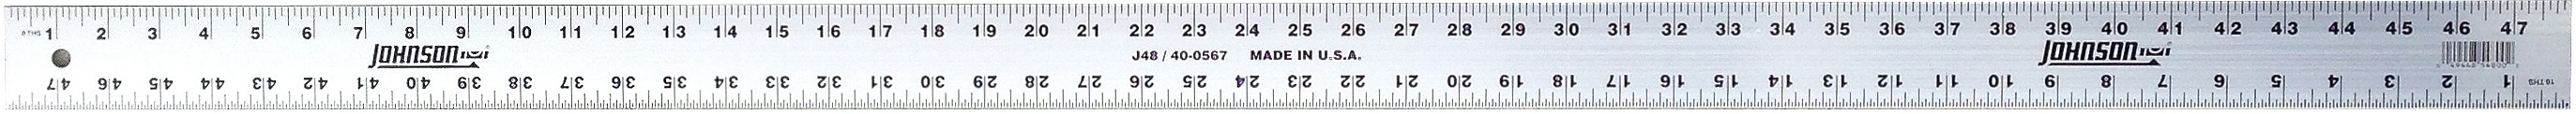 Swanson Tool Company 2-ft Metal Straight Edge in the Yardsticks & Rulers  department at